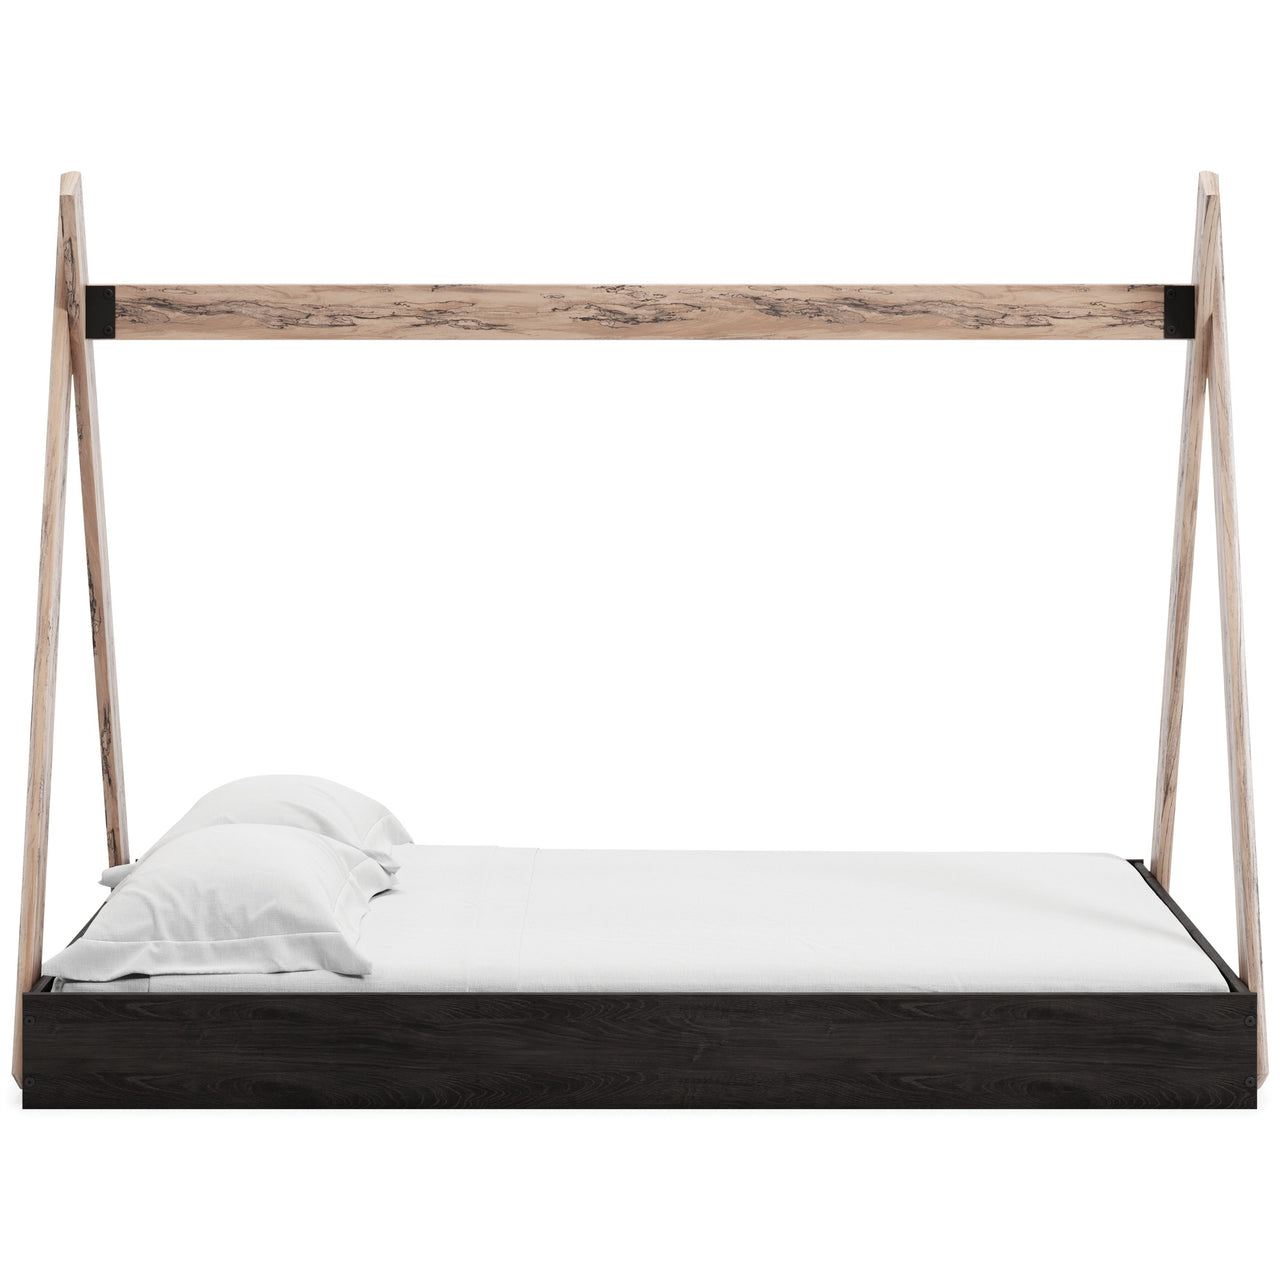 Piperton - Complete Bed In Box - Tony's Home Furnishings